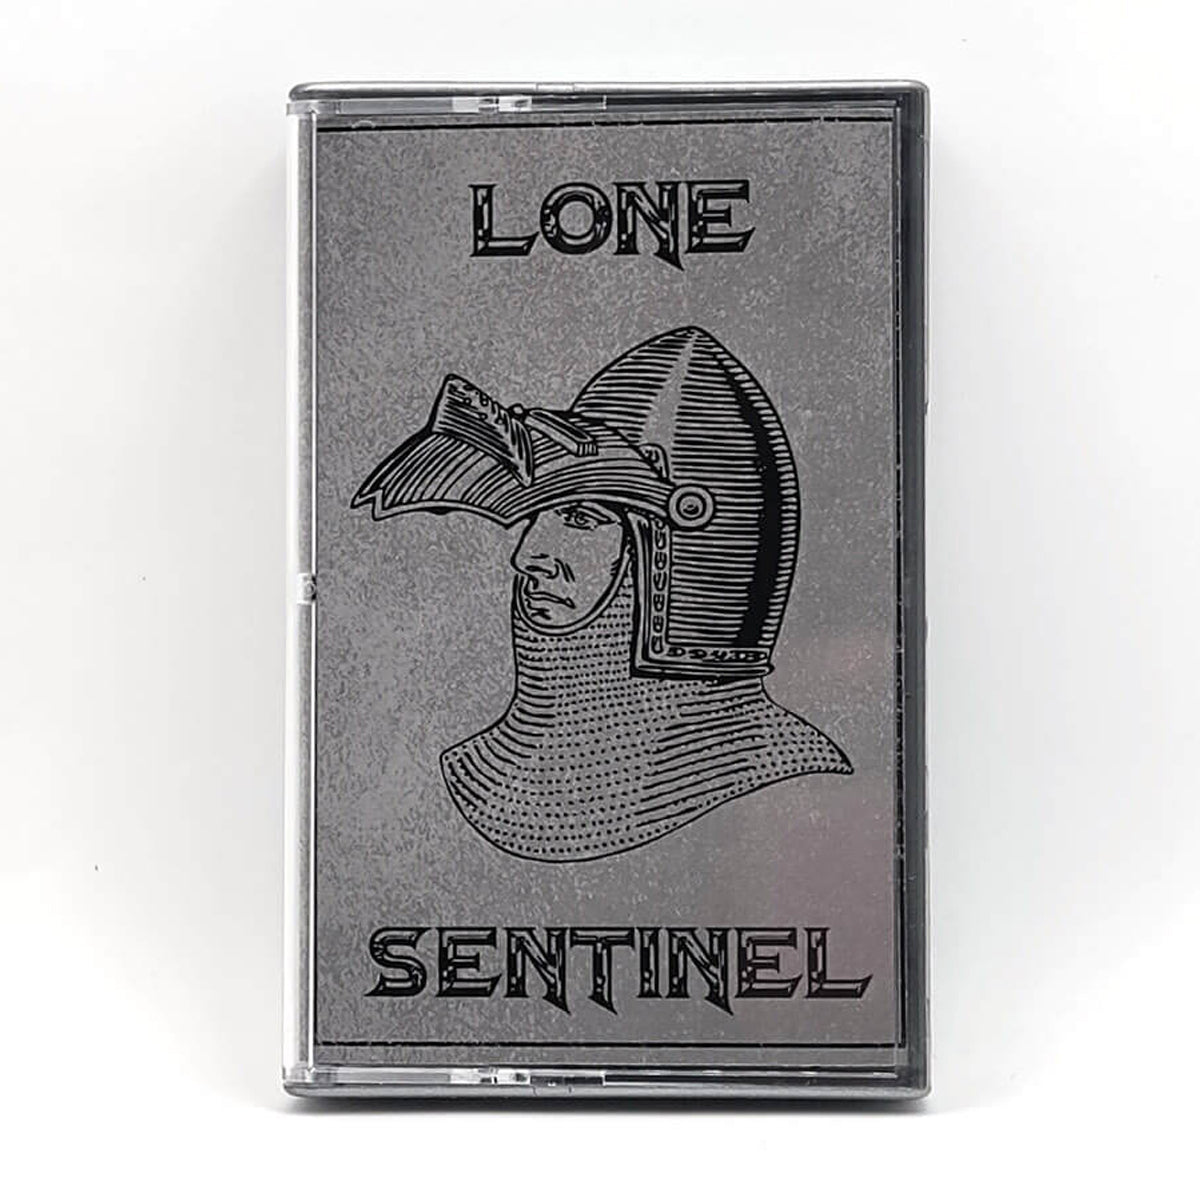 [SOLD OUT] LONE SENTINEL "Compilation I" cassette tape